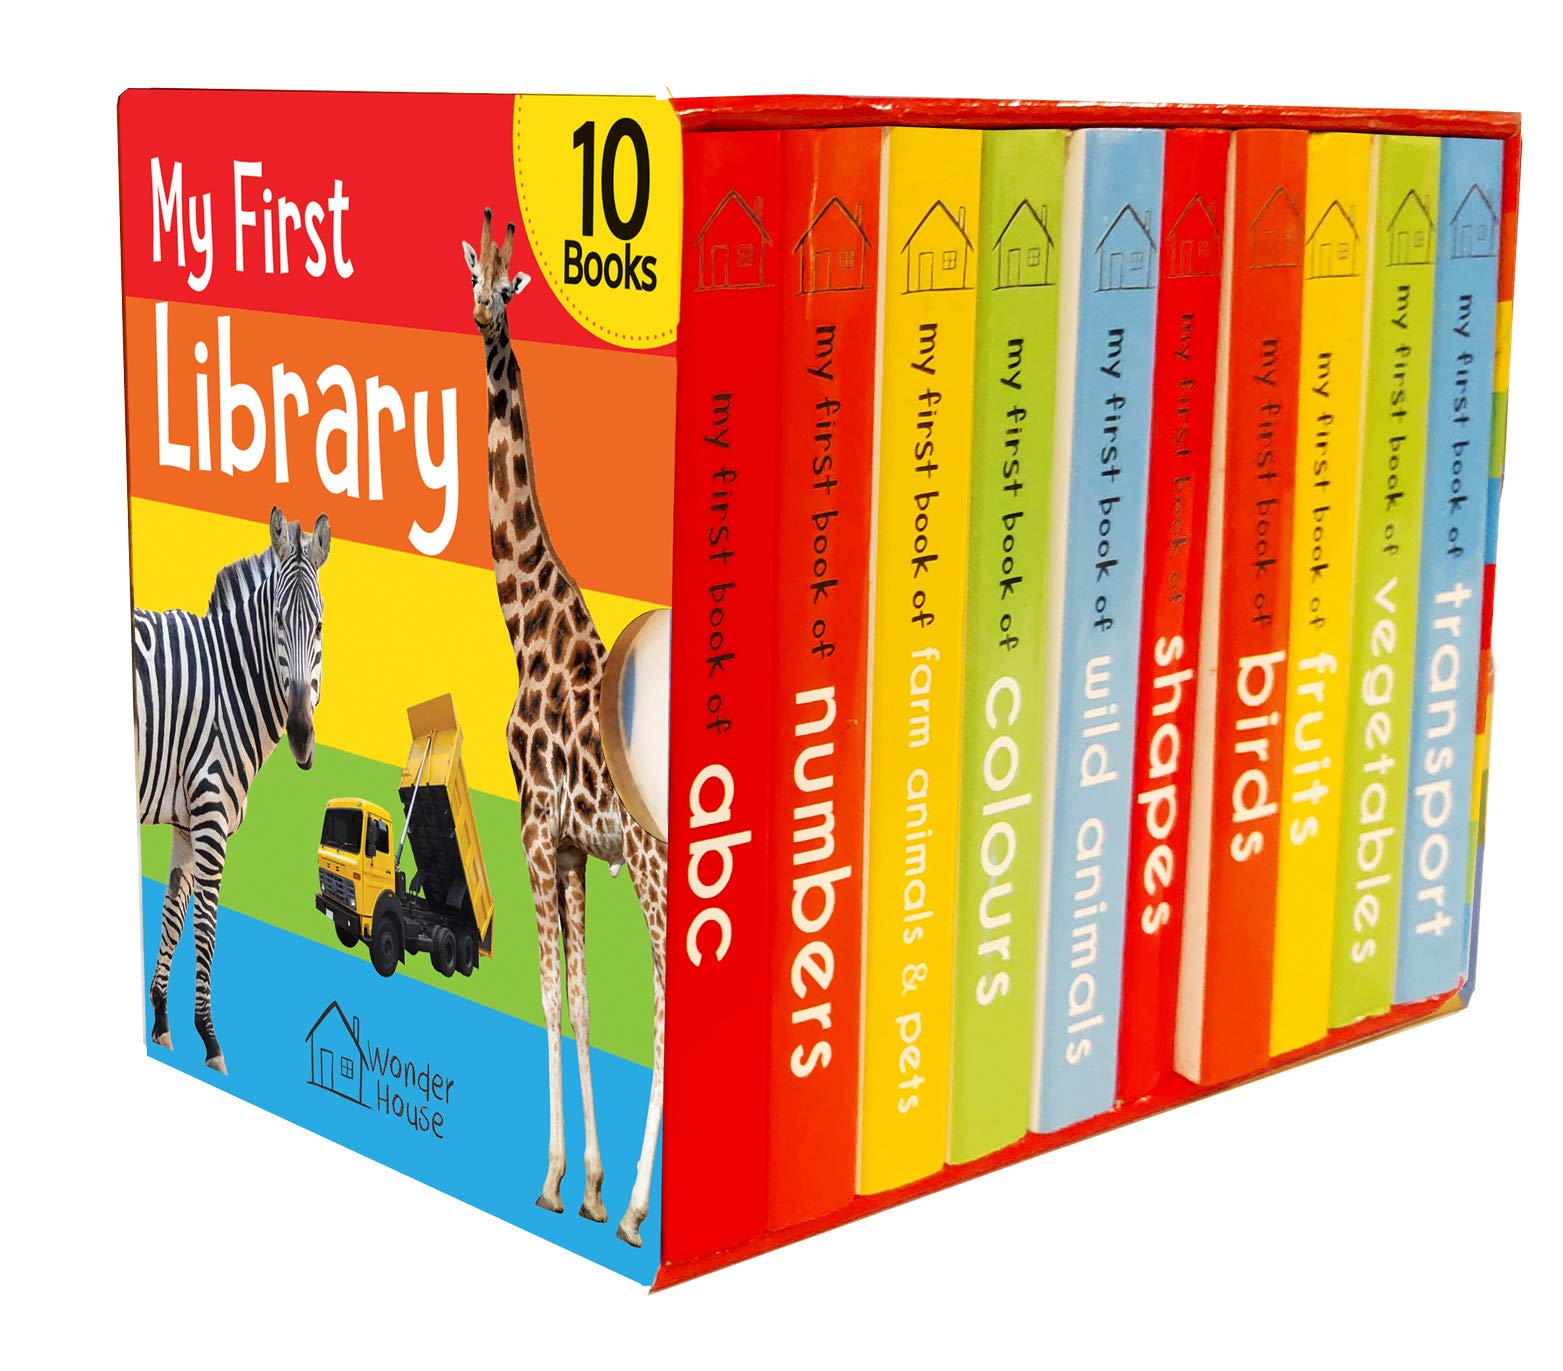 My First Library-Boxset of 10 Board Books for Kids-classiblogger